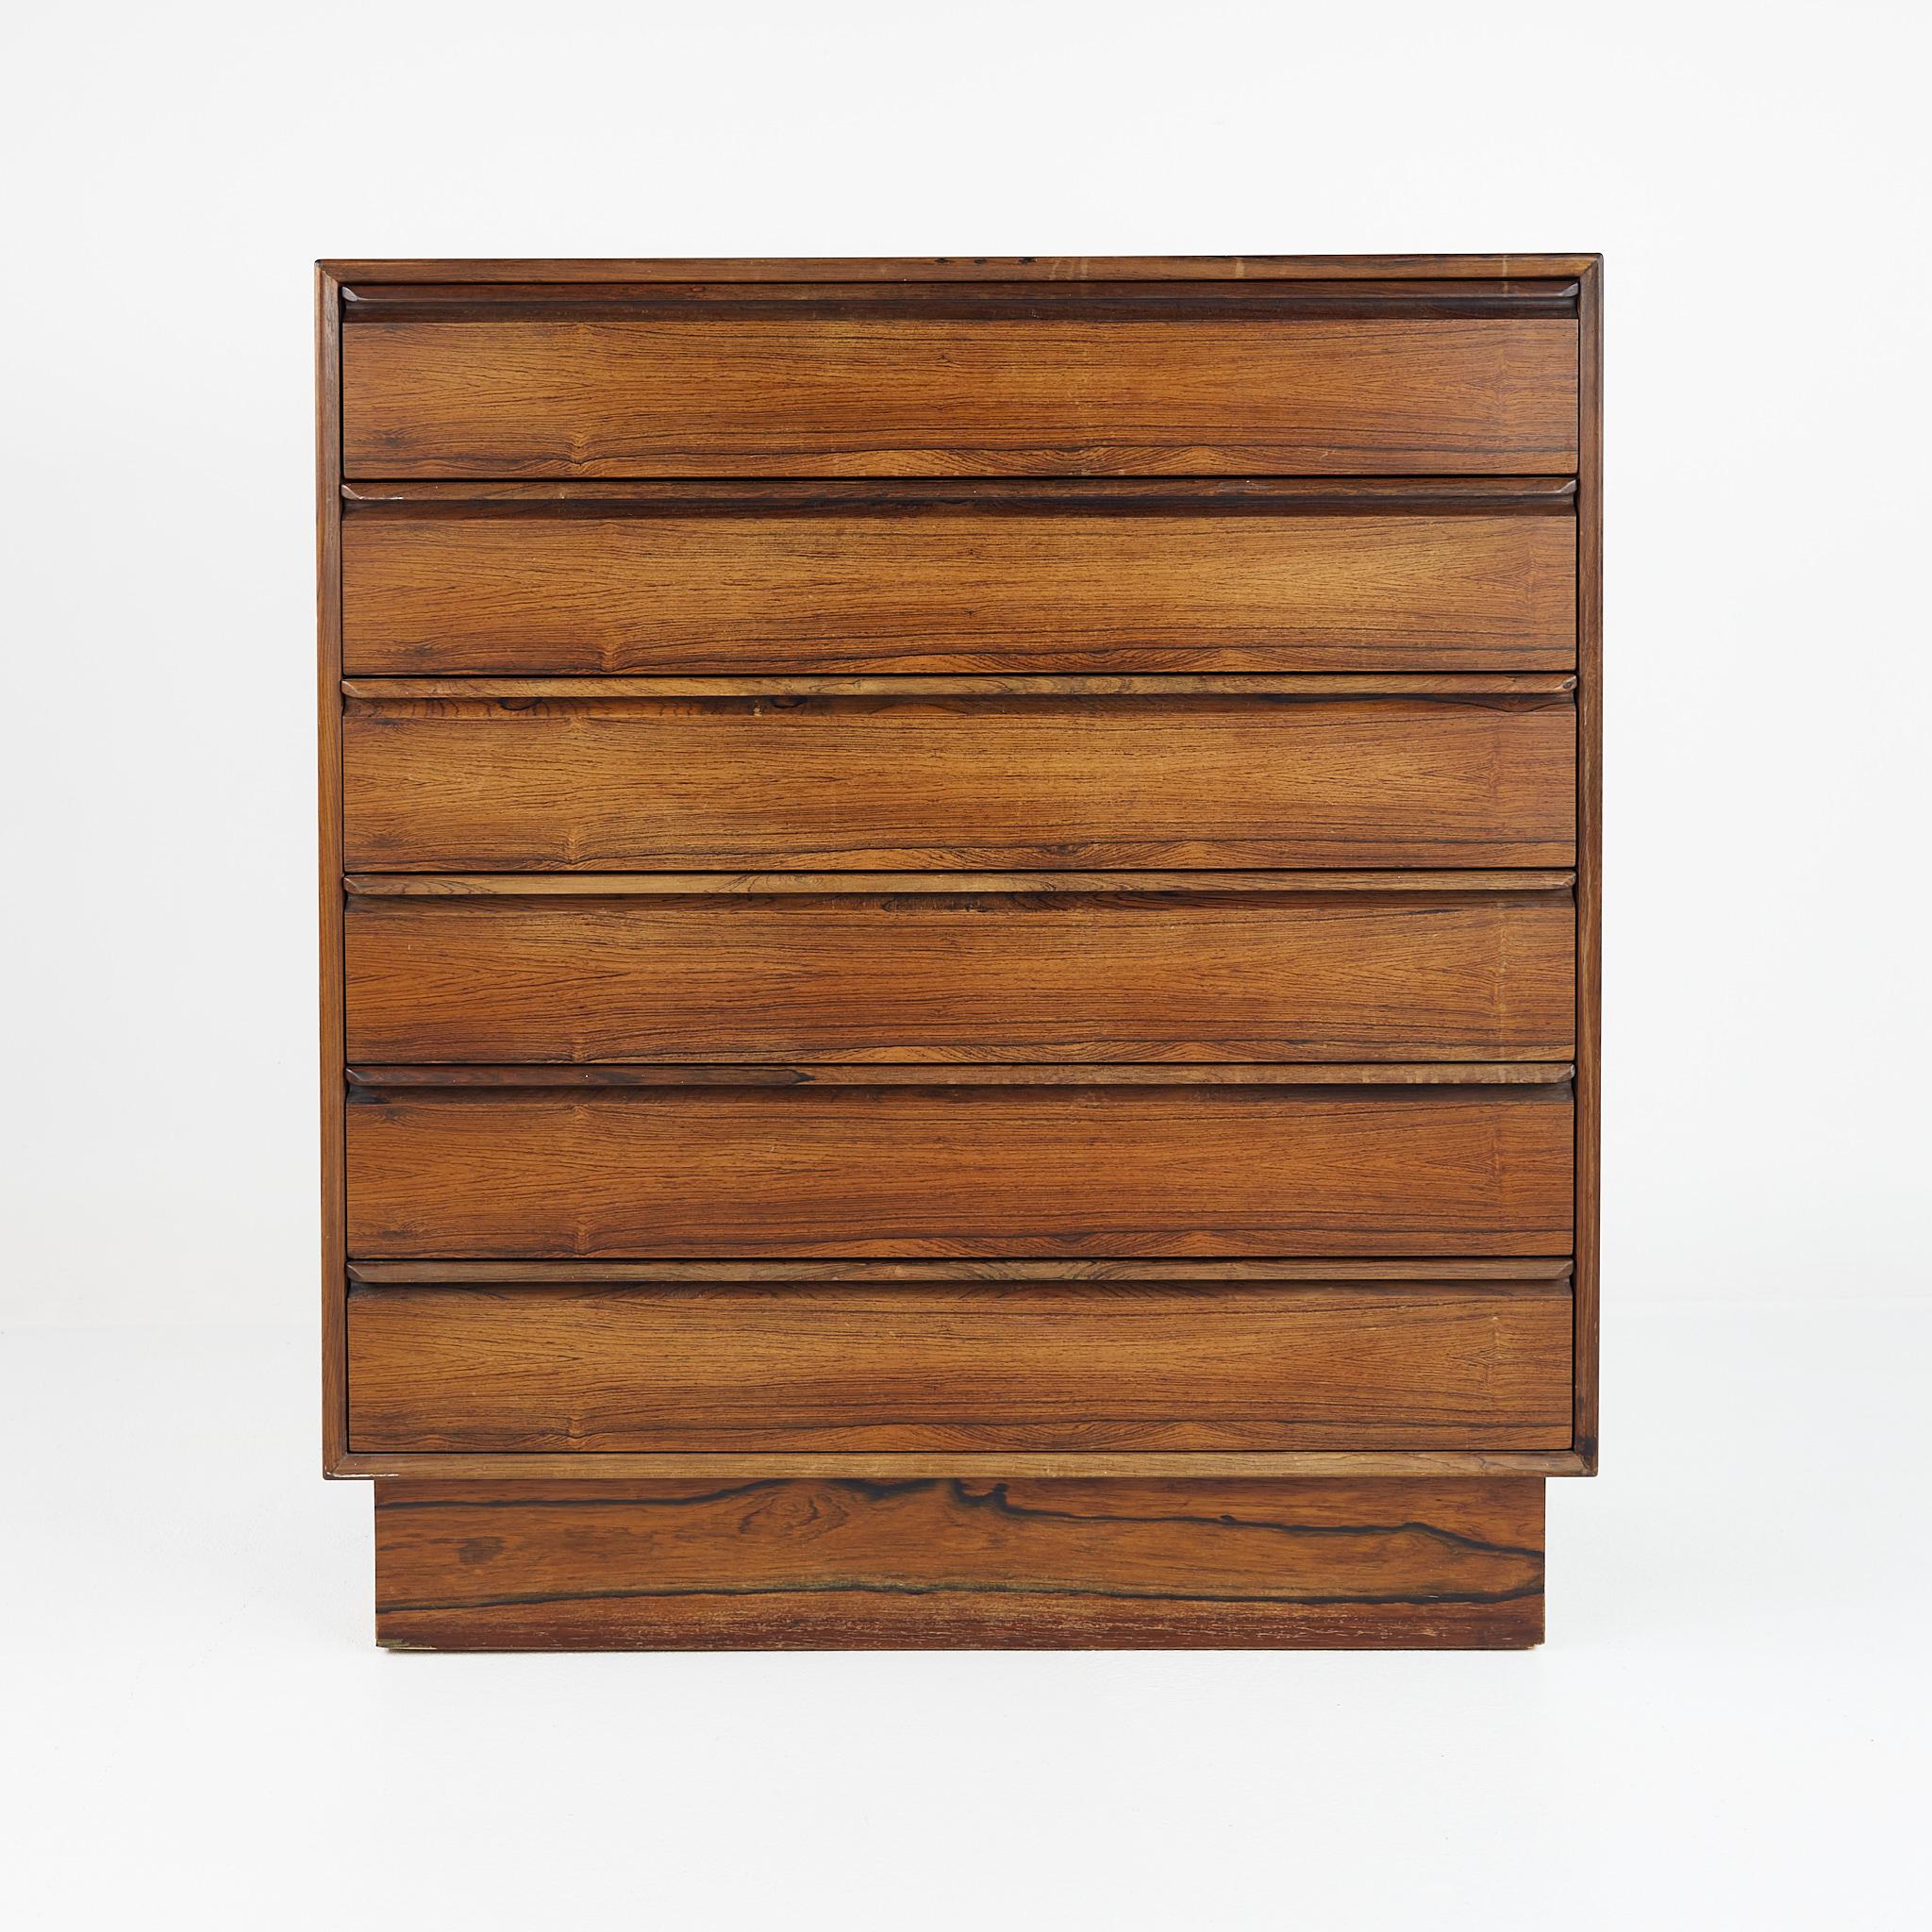 Westnofa mid century rosewood 6-drawer highboy dresser

This dresser measures: 36 wide x 18 deep x 40 inches high

?All pieces of furniture can be had in what we call restored vintage condition. That means the piece is restored upon purchase so